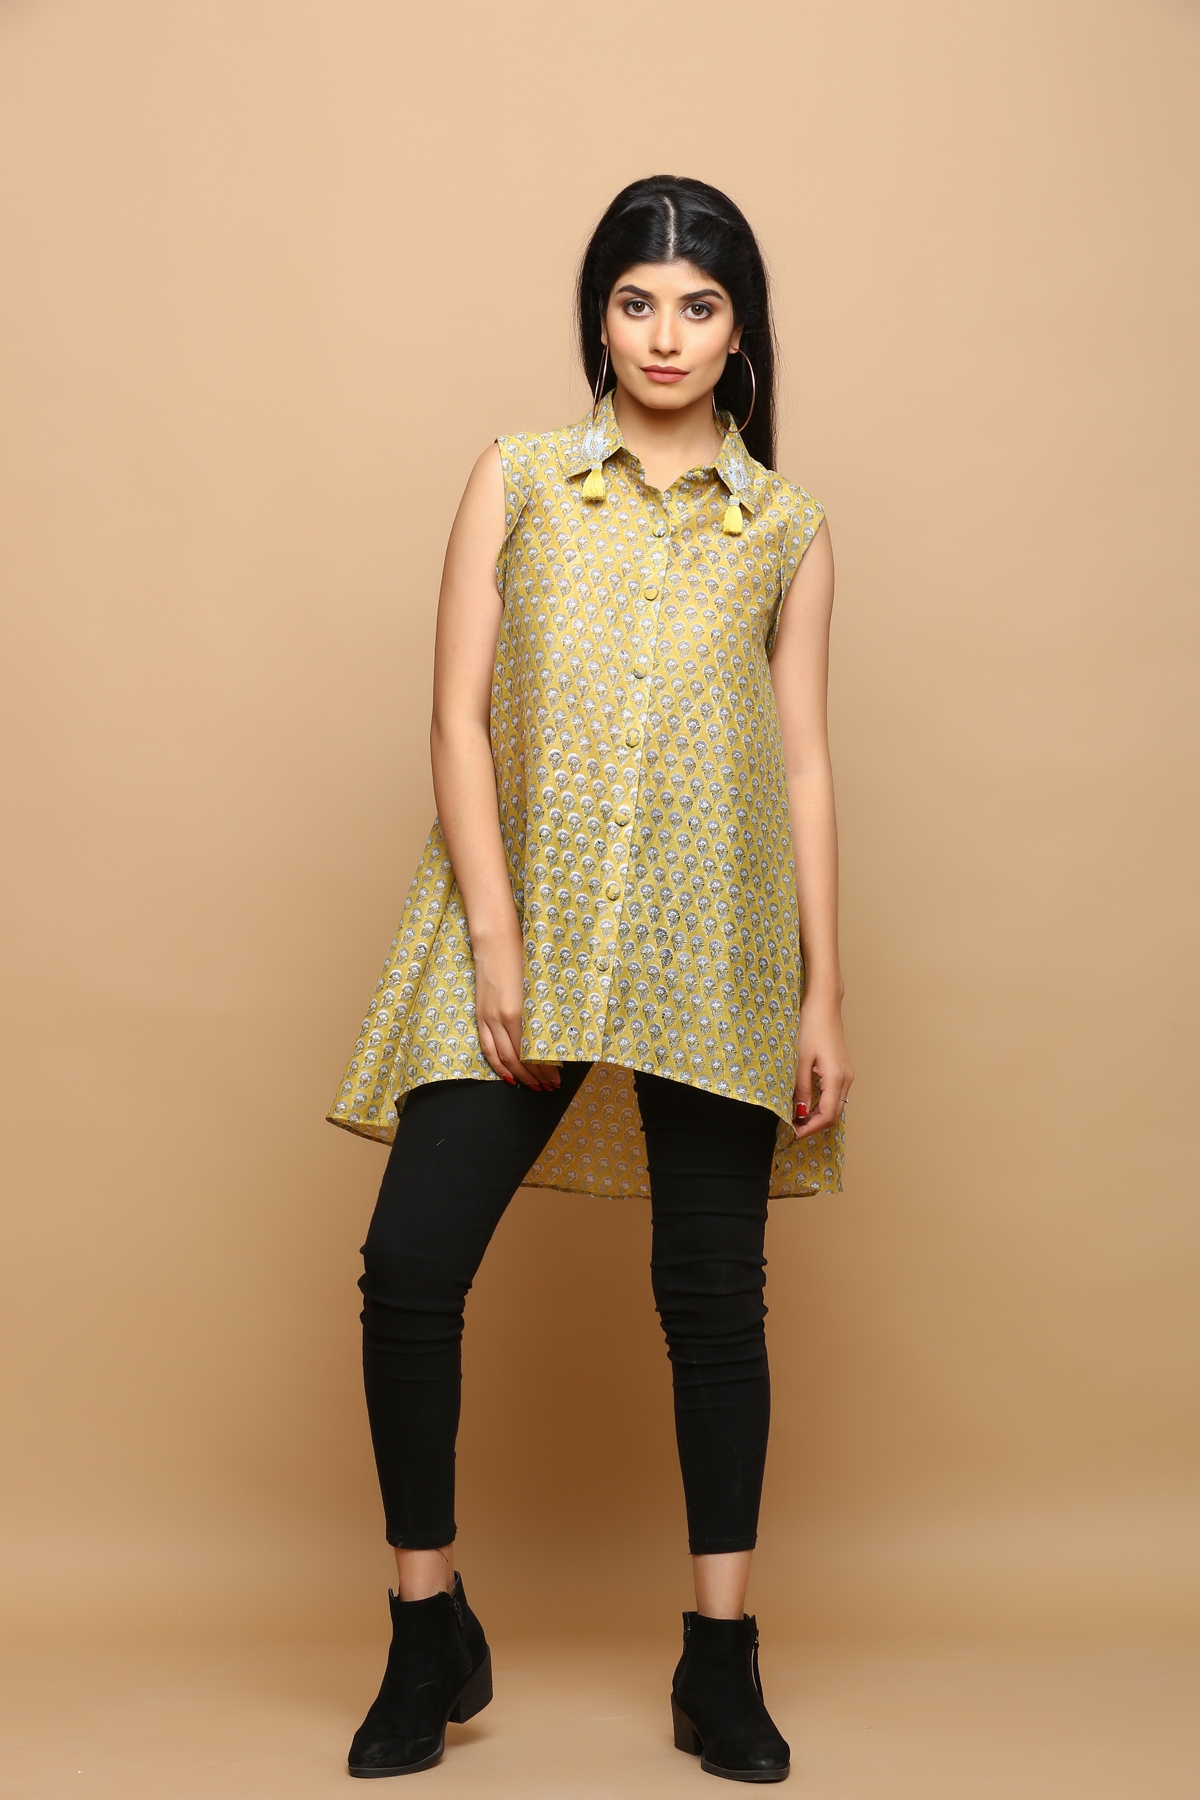 KAARAH BY KAAVYA | Chanderi a- symetrical top with hand work detailing on the collar undefined